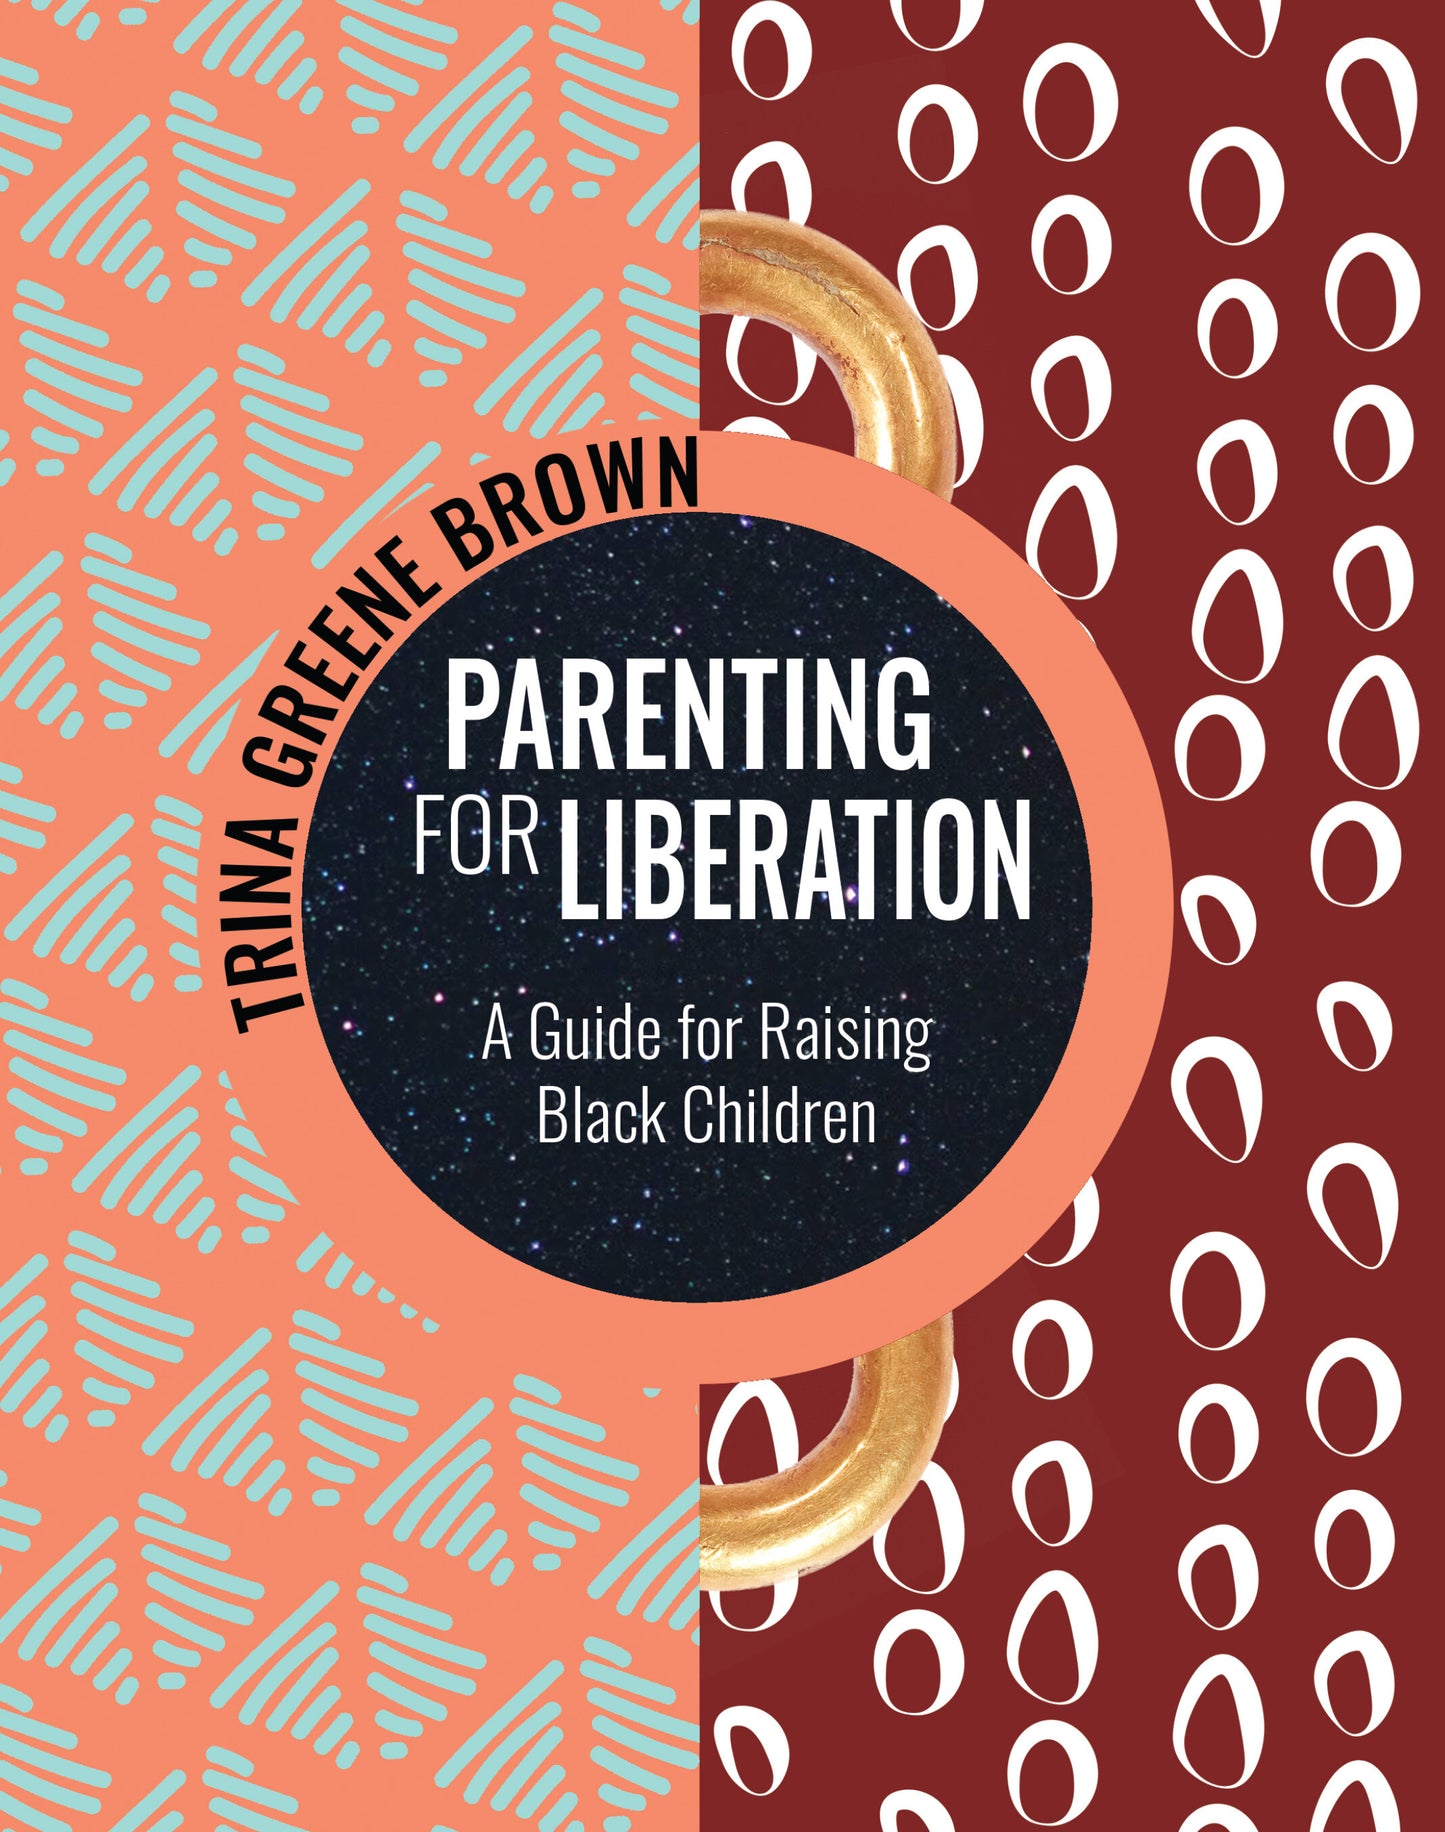 Parenting for Liberation // A Guide for Raising Black Children